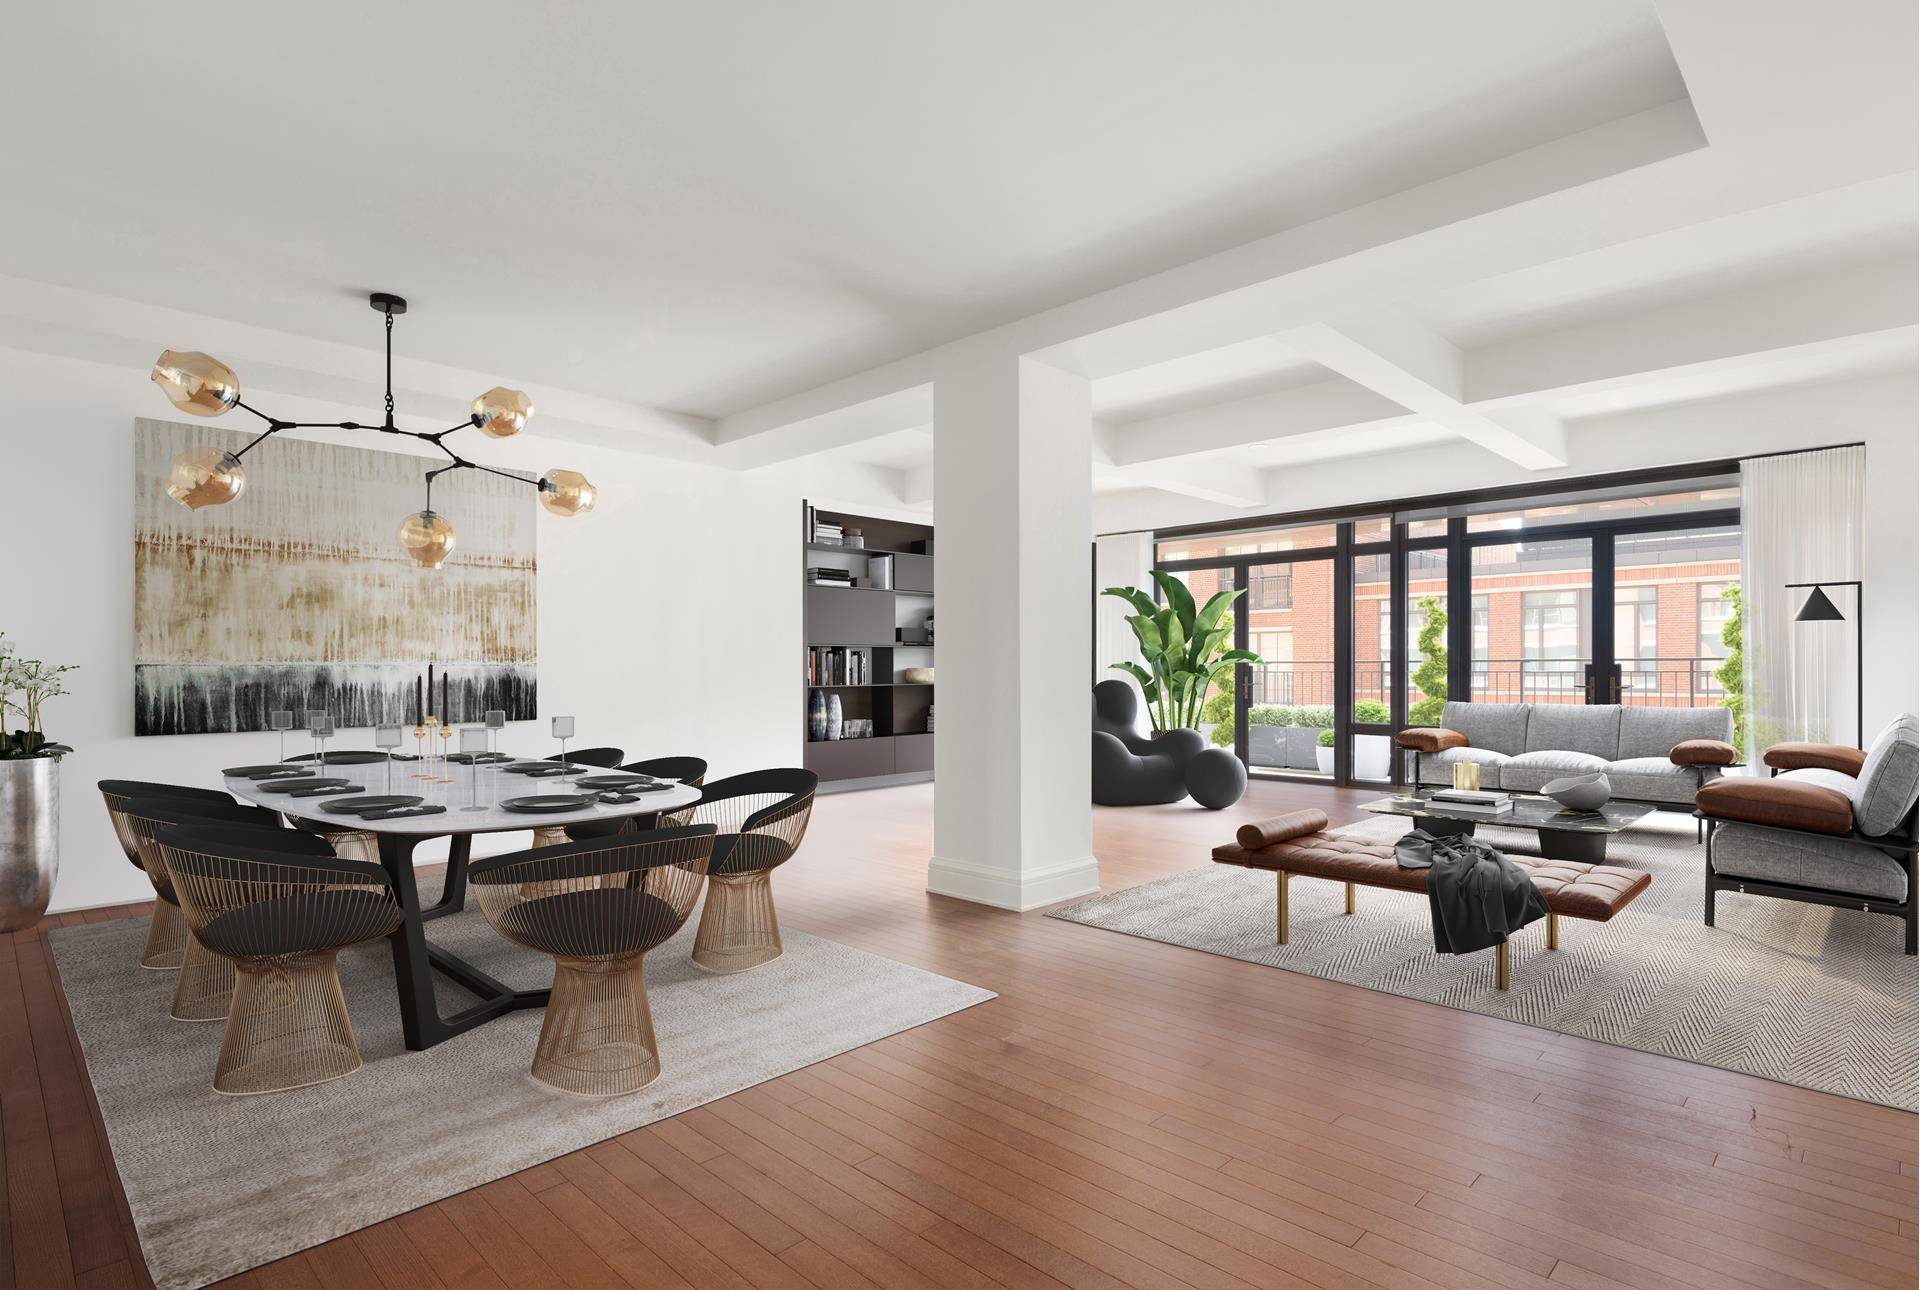 An exquisite residence within the magnificent new Greenwich Lane project, this three bedroom, three and a half bath condominium offers 2, 944 square feet of indoor space plus 586 square ...